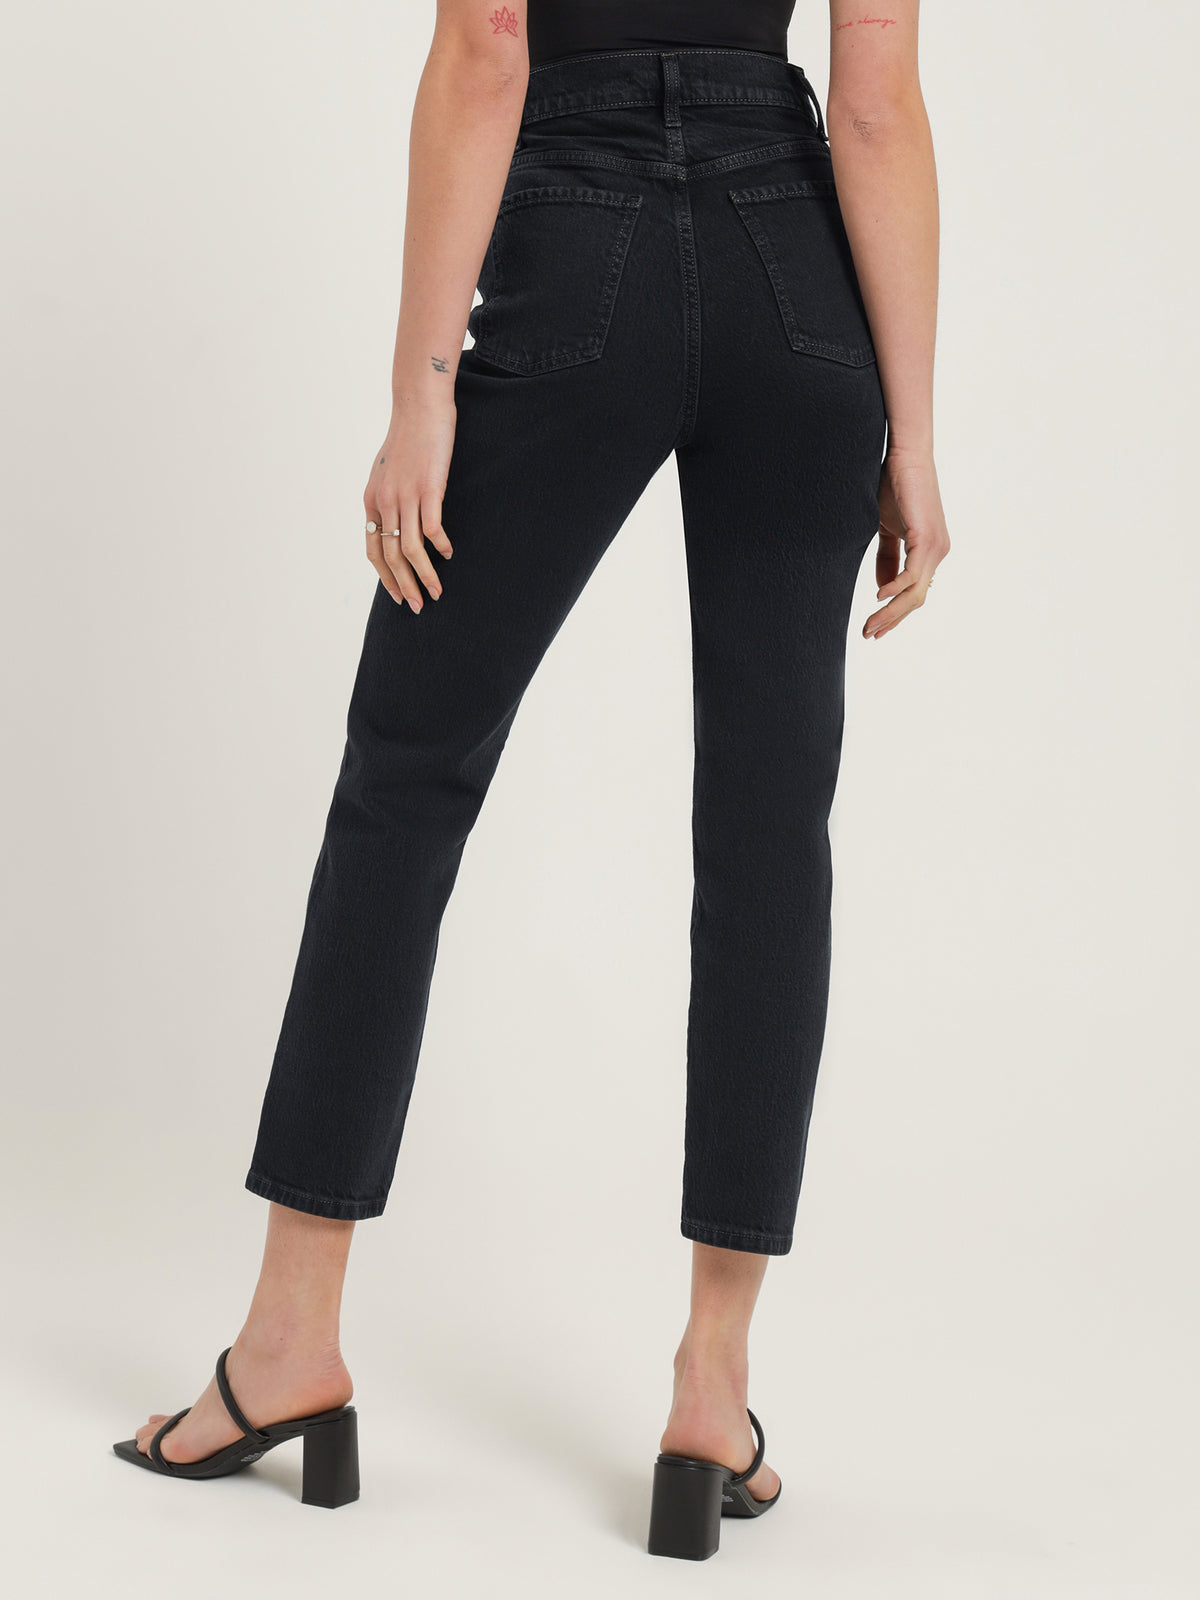 Frankie Ankle Stretch Jeans in Speculation Black